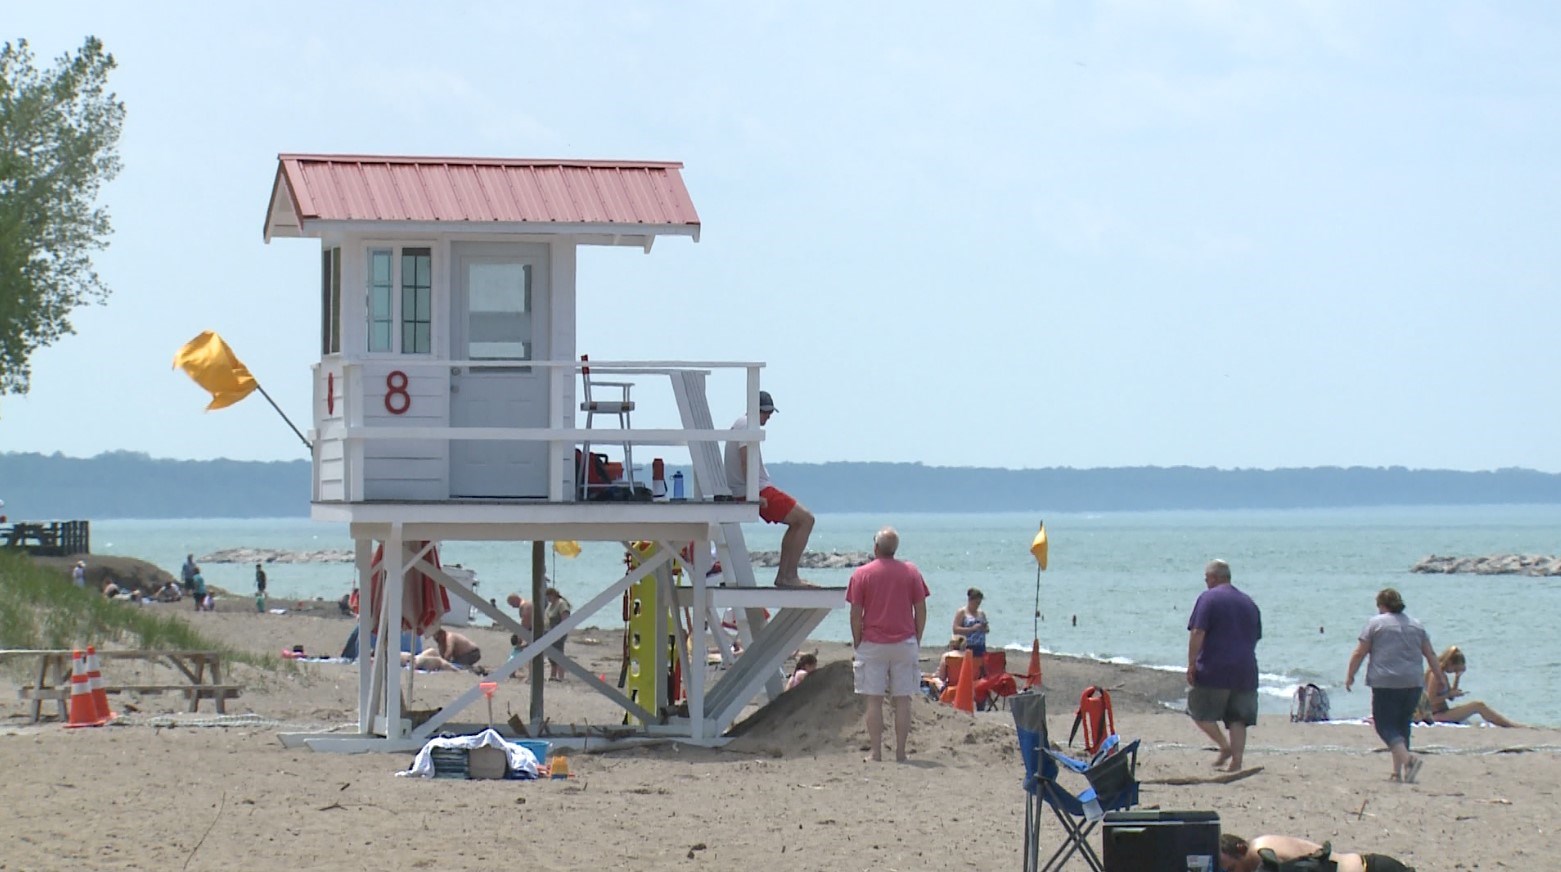 Presque Isle State Park Seeks Lifeguards for Summer 2021